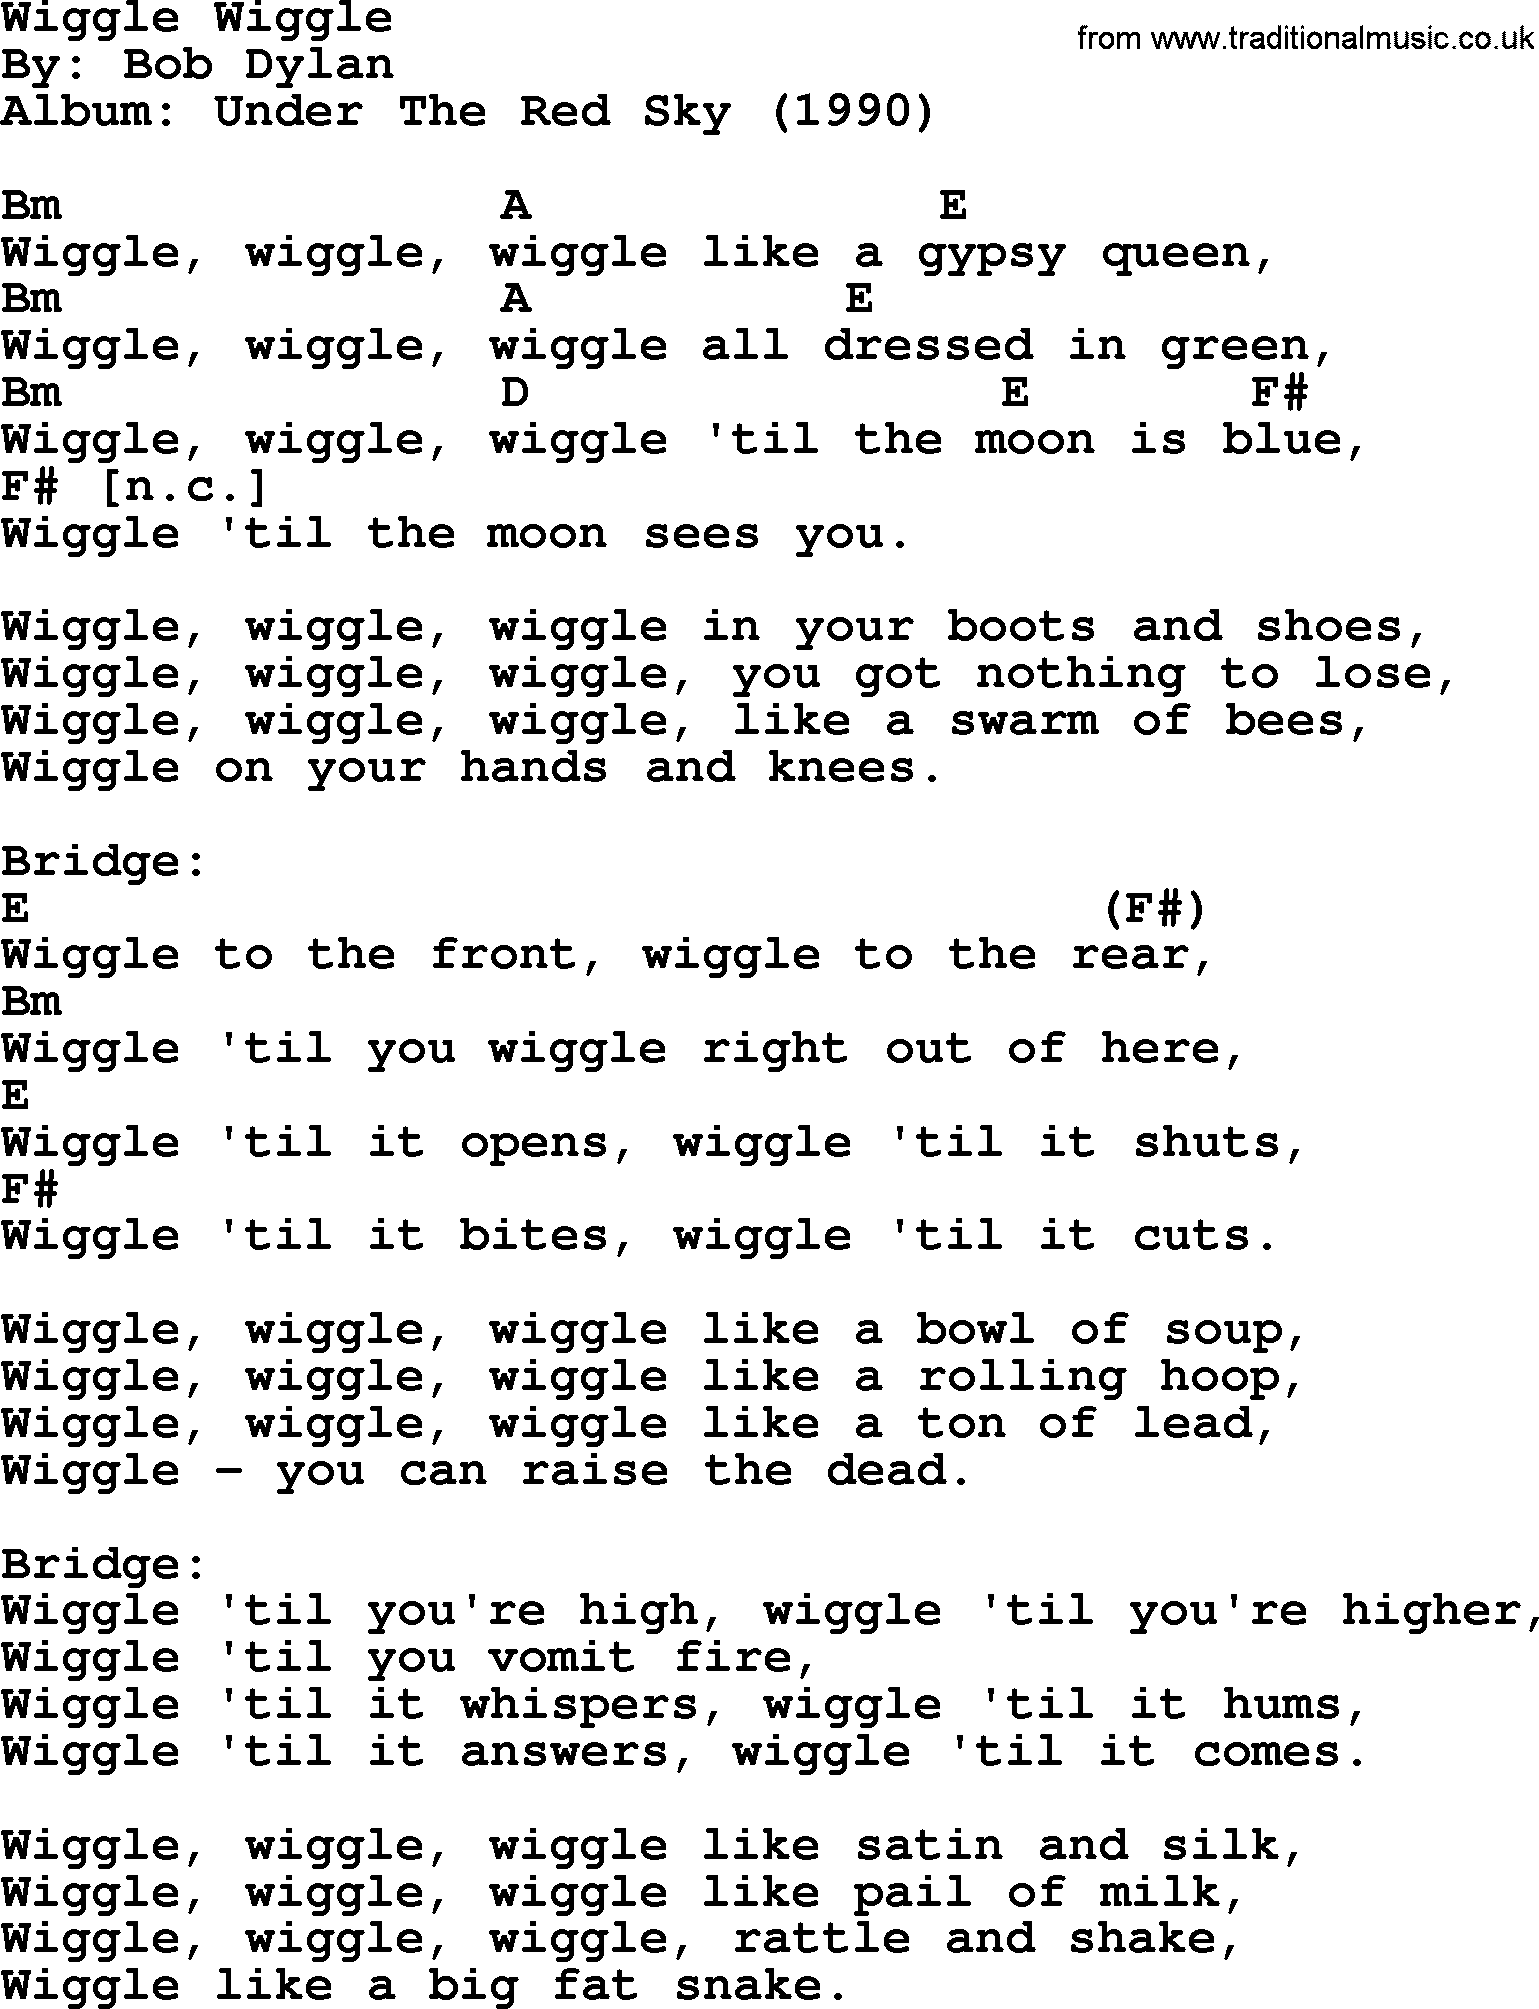 Bob Dylan song, lyrics with chords - Wiggle Wiggle